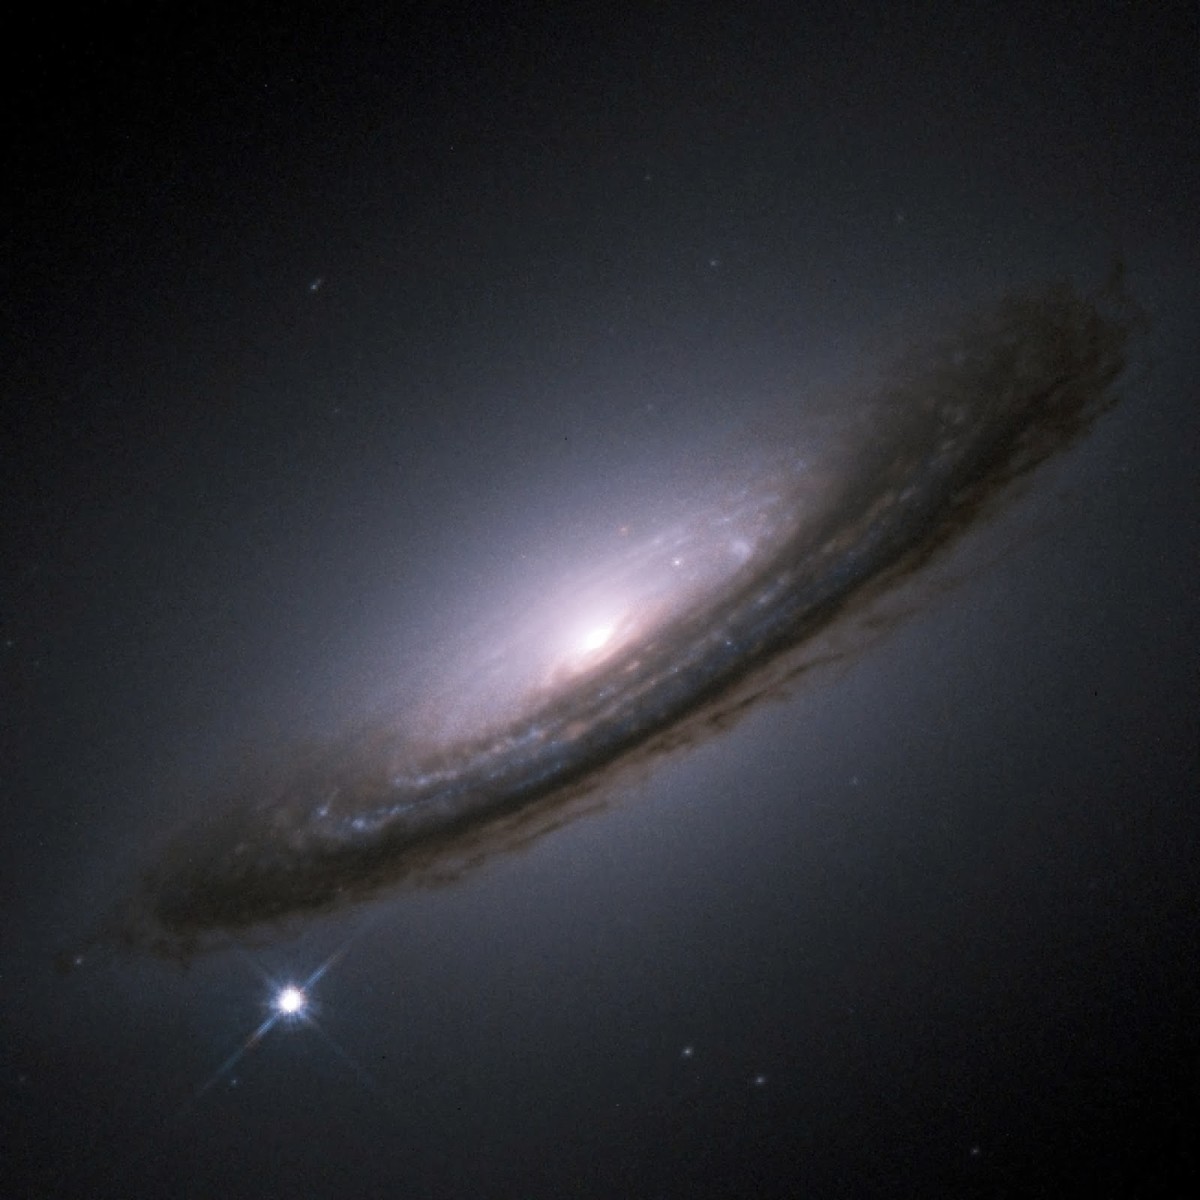 A supernova in the lower left hand side.